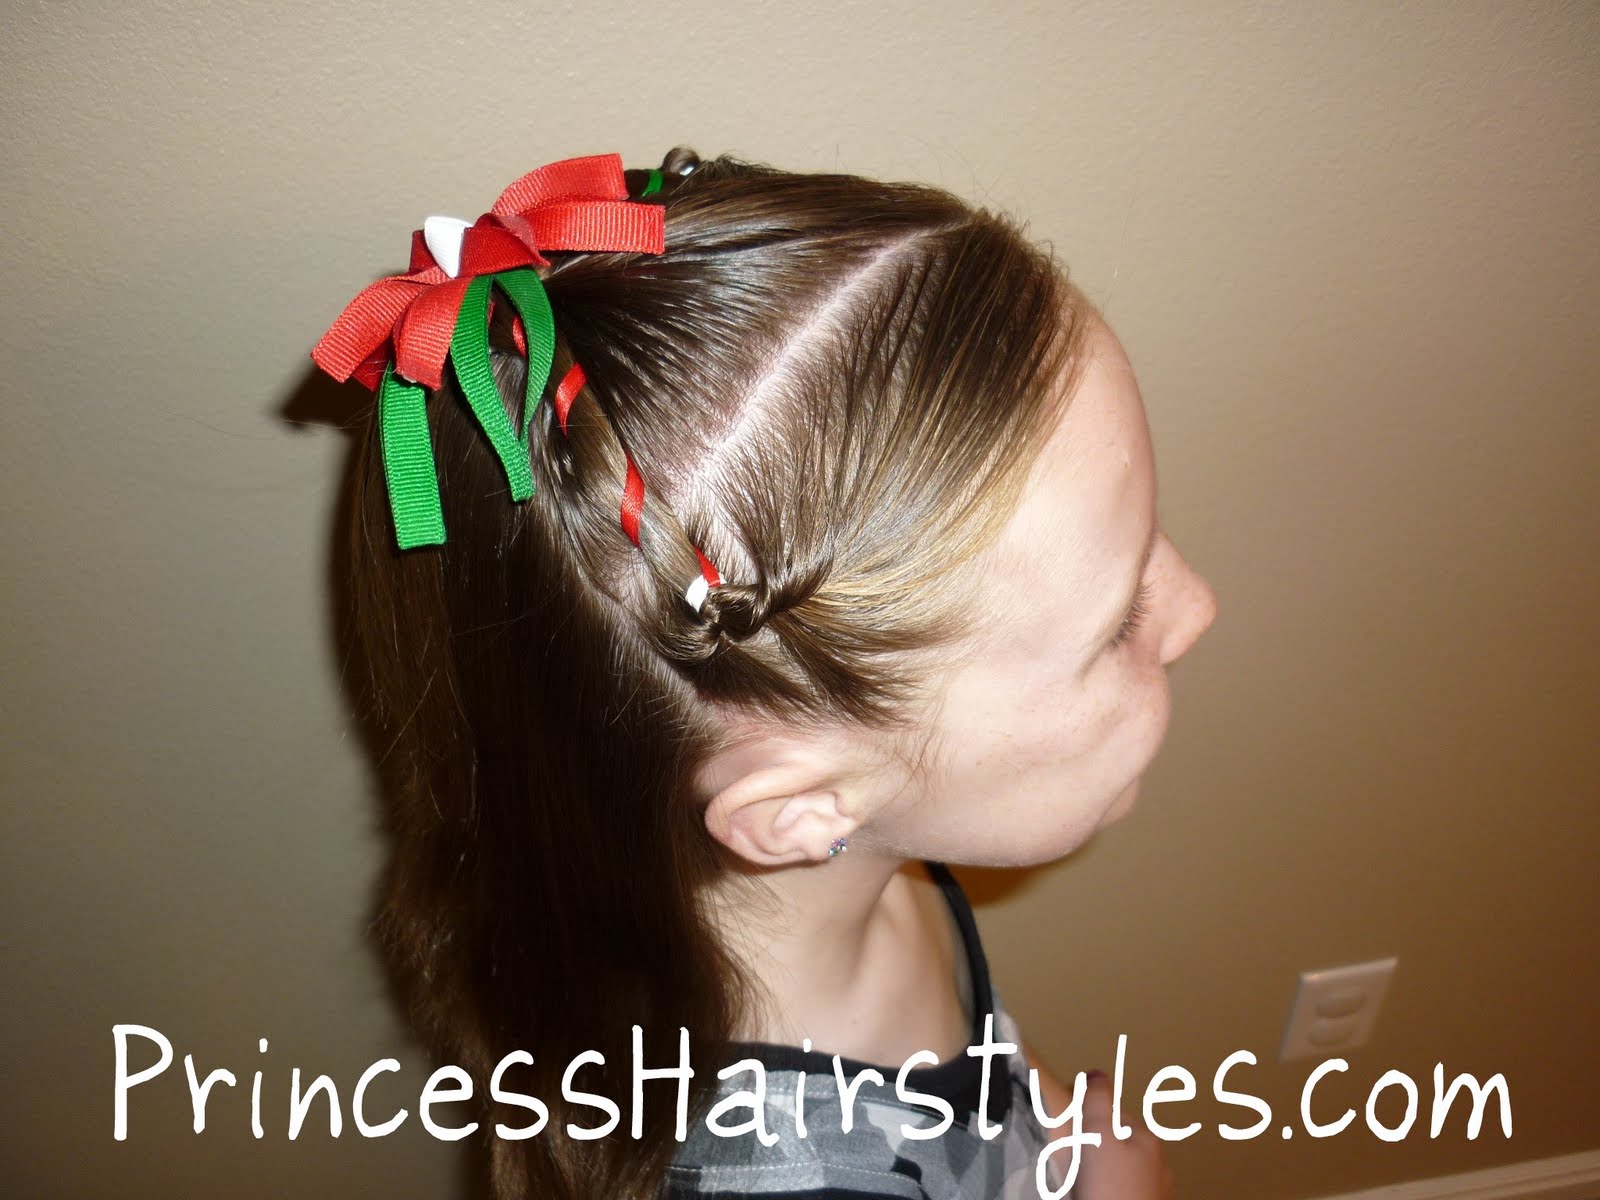 Christmas Hairstyle - Easy | Hairstyles For Girls - Princess Hairstyles